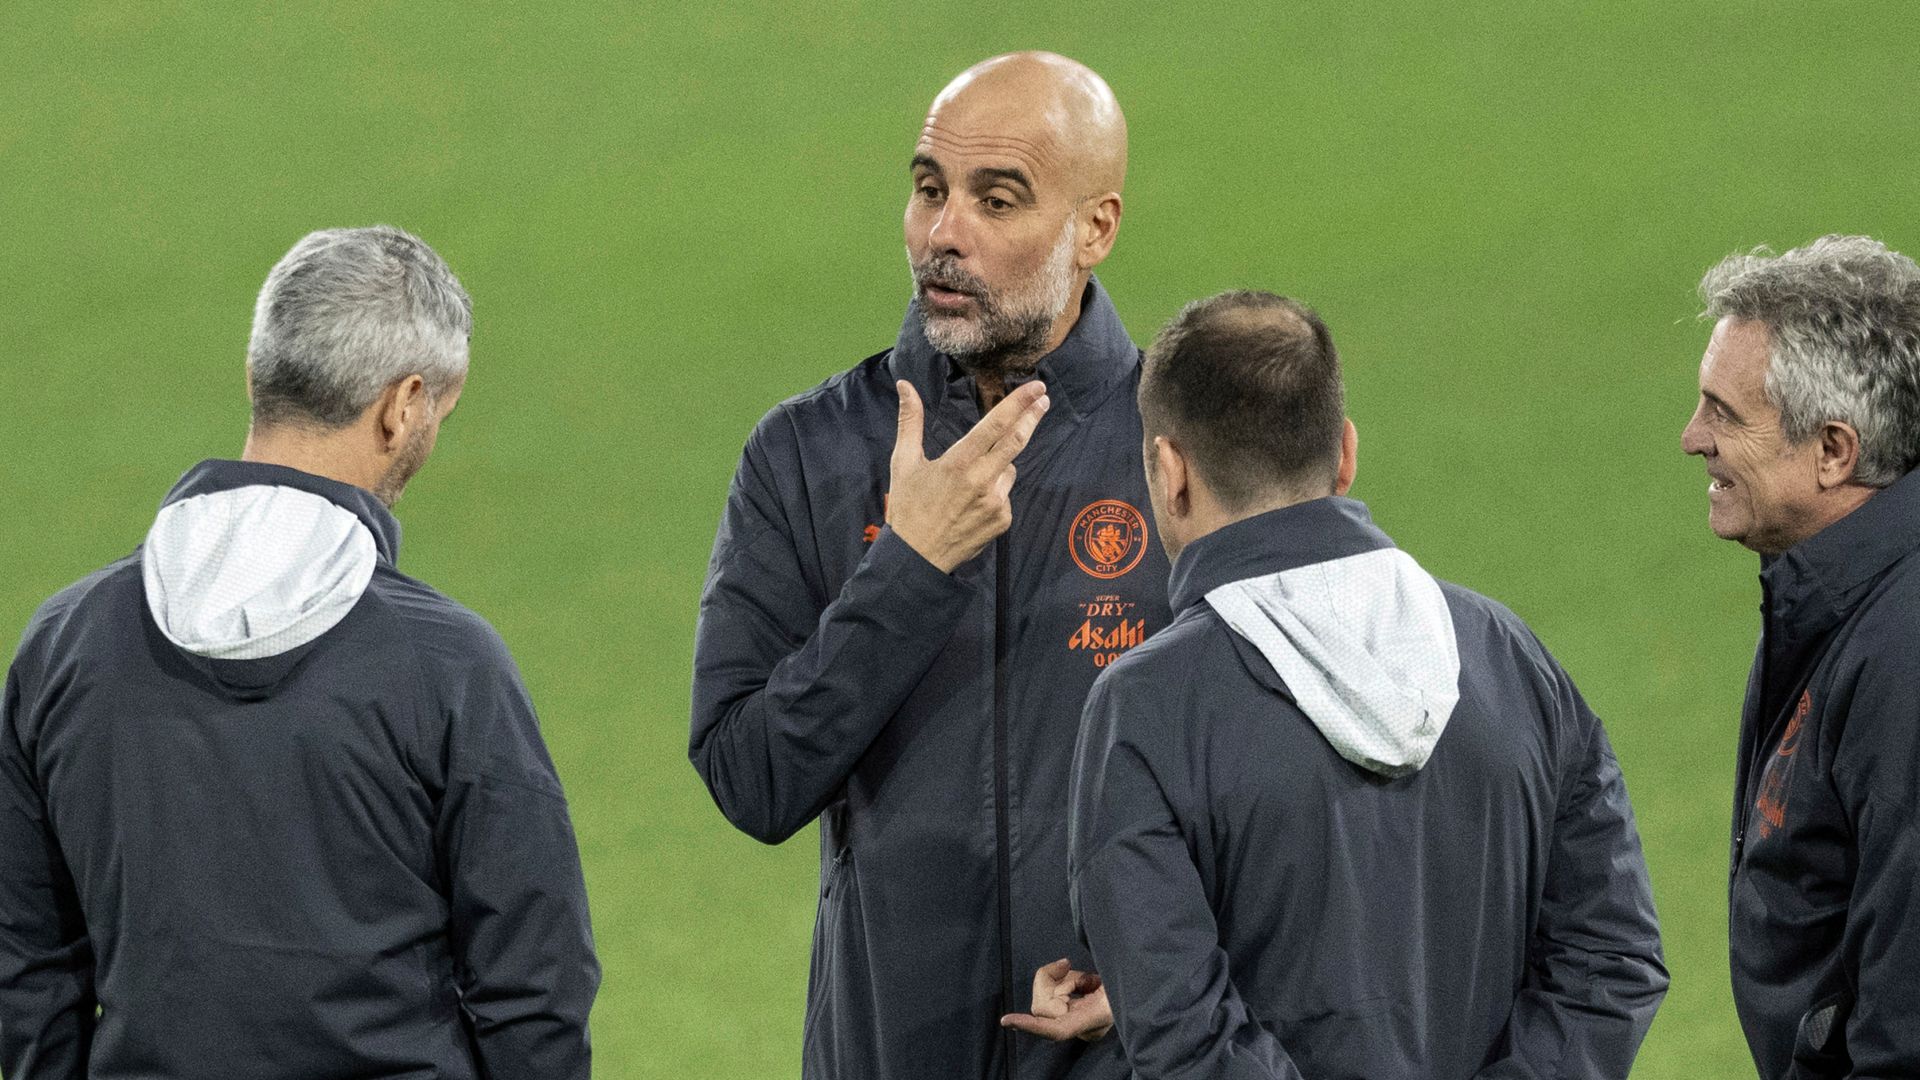 Youngs Boys vs Man City preview: We must adapt to artificial surface - Pep